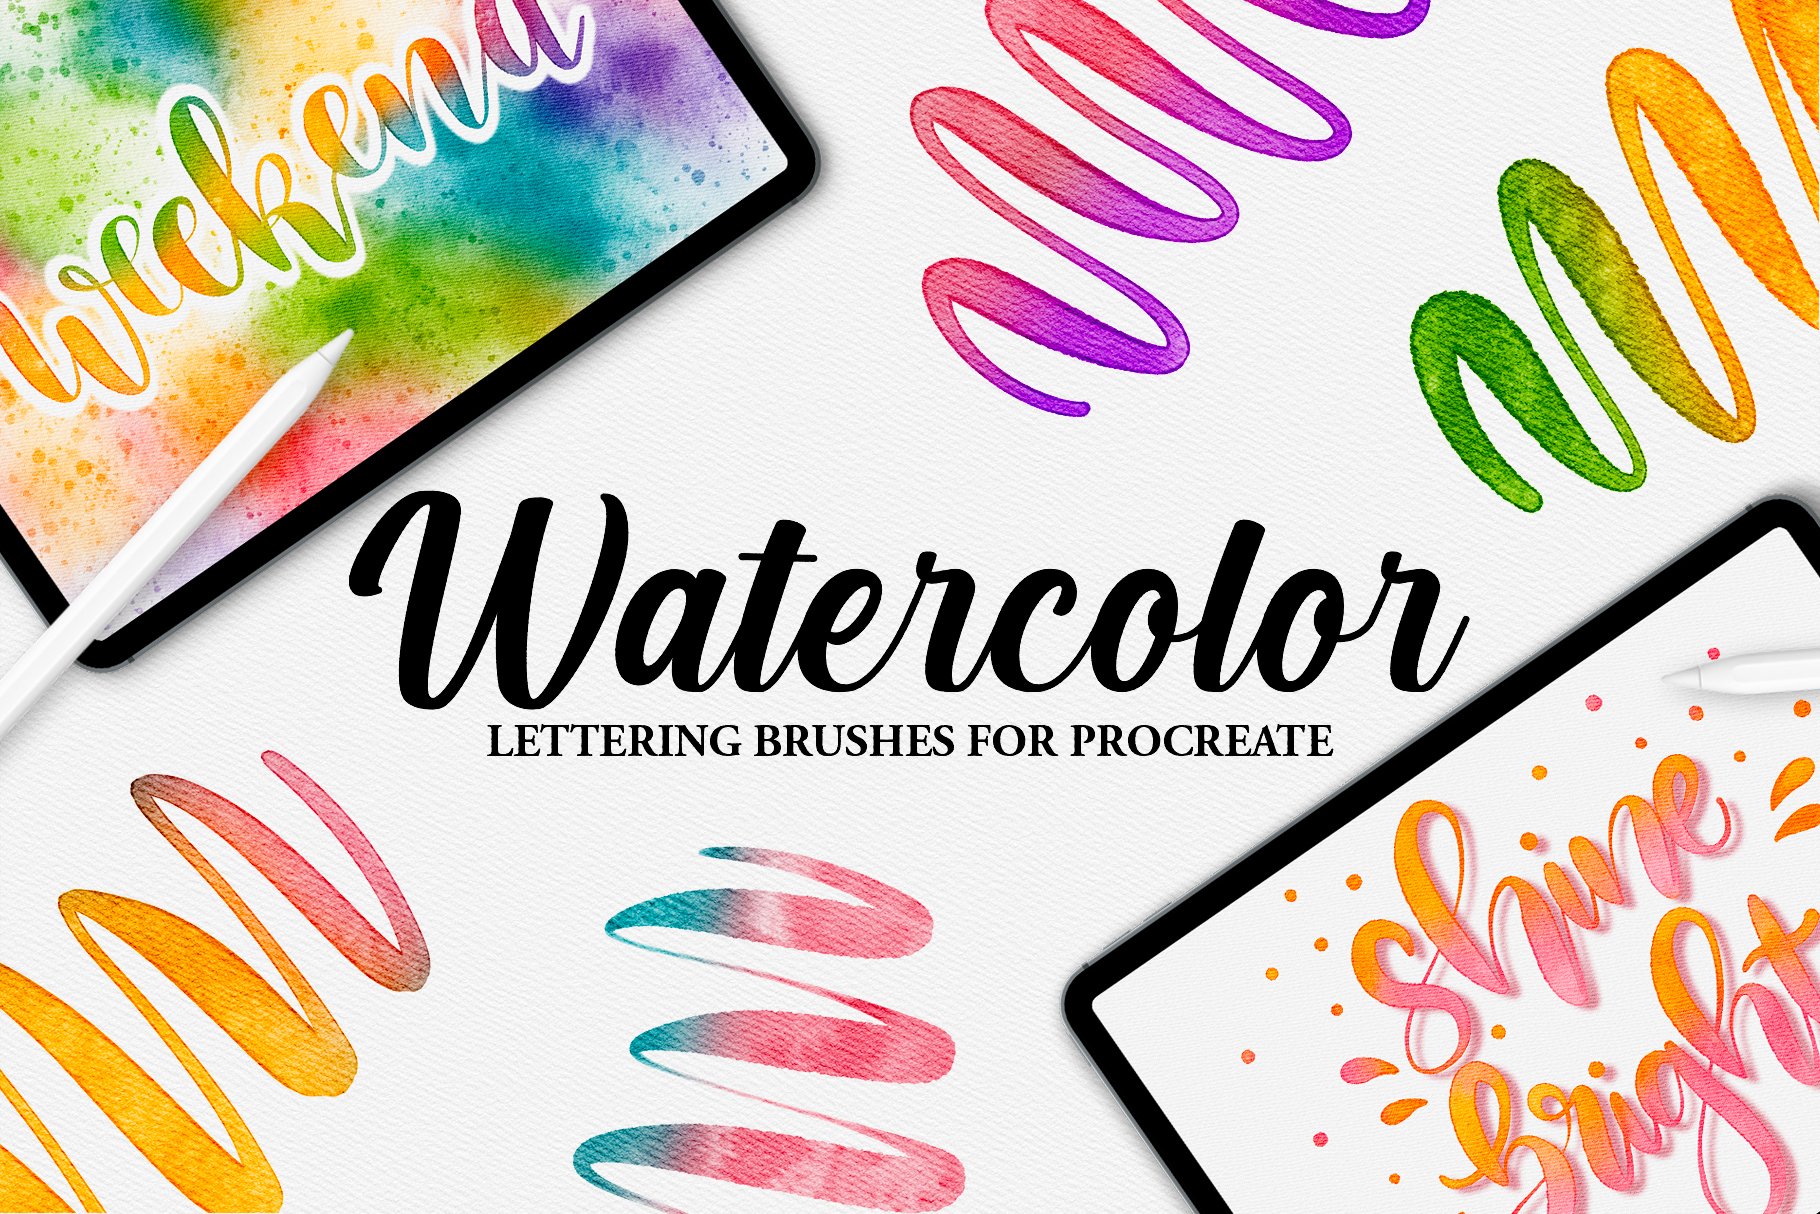 Realistic Watercolor Lettering Brushes for Procreate